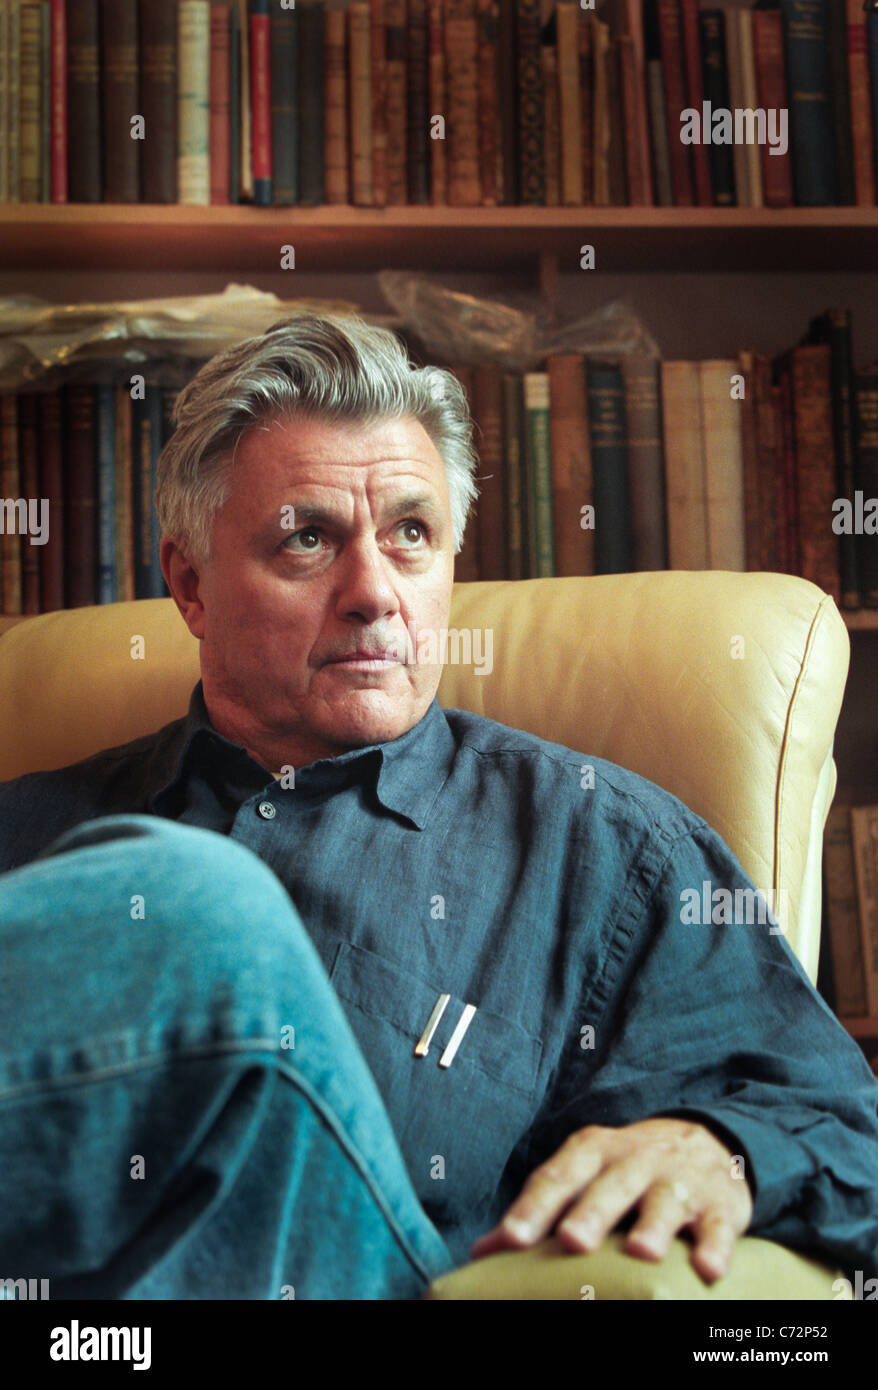 American author John Irving, writer/ novelist, author of 'The Word According to Garp', 'The Cider House Rules', and many more. Stock Photo